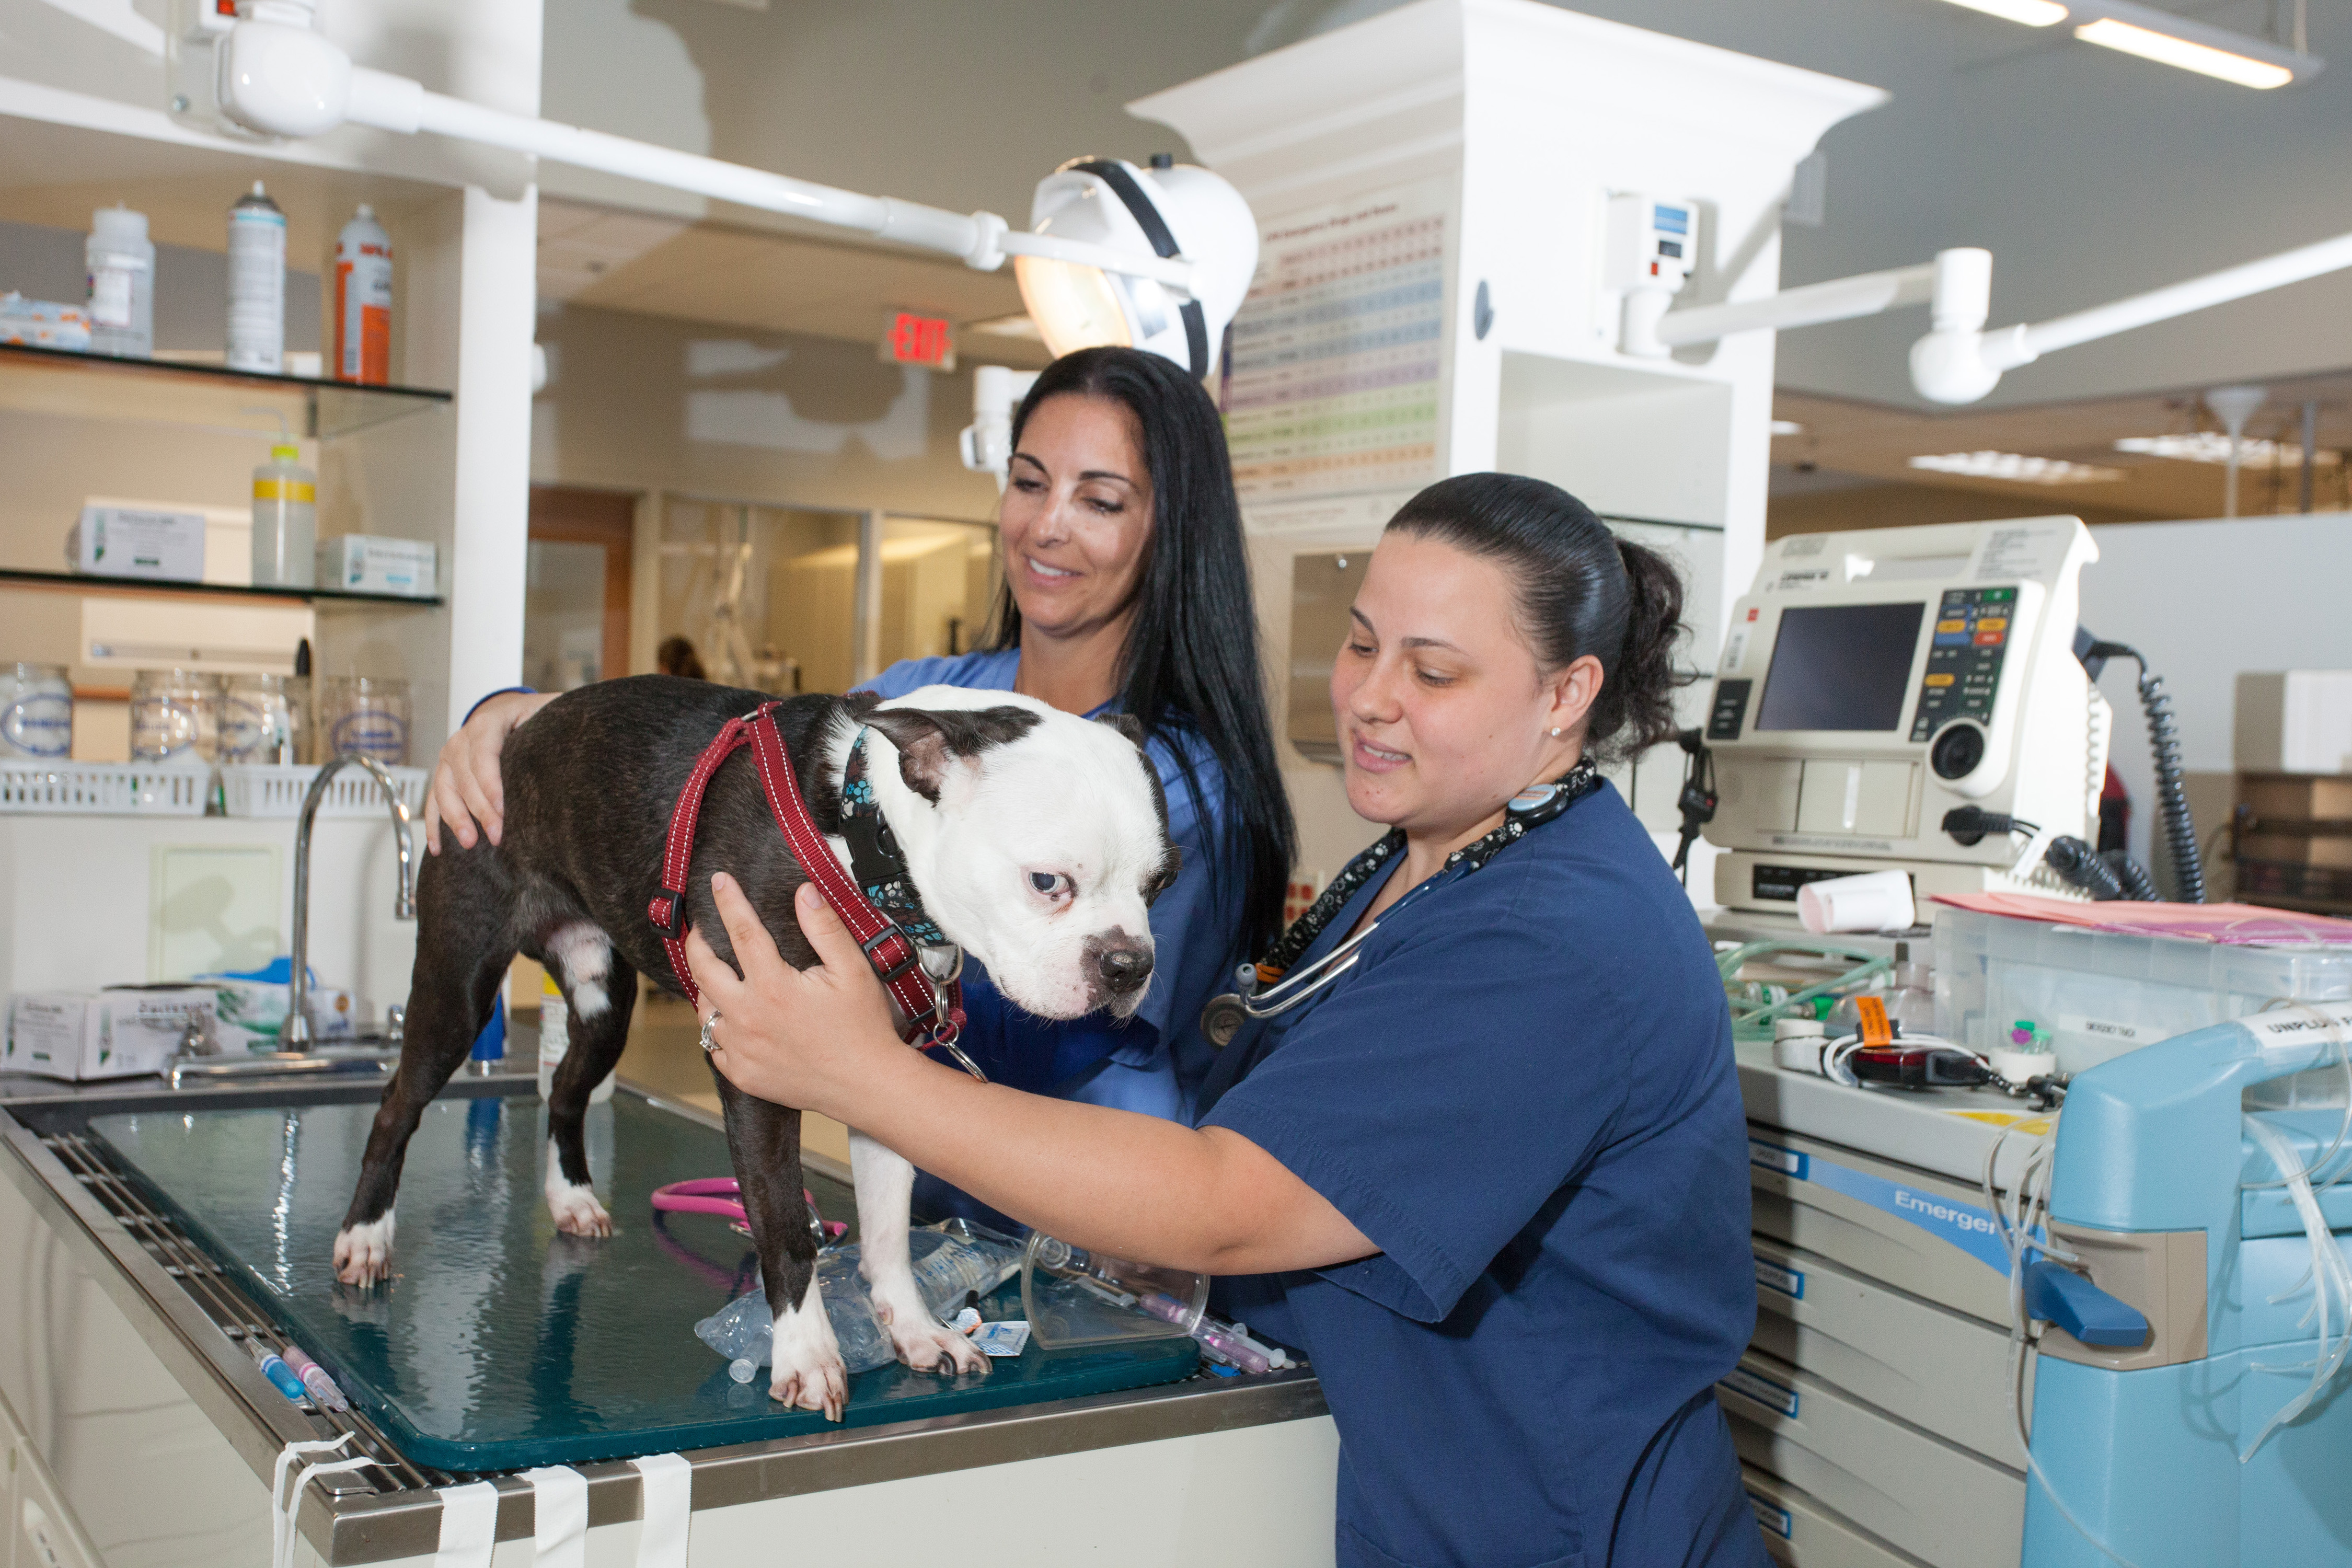 canine pain management clinical trial at NorthStar VETS